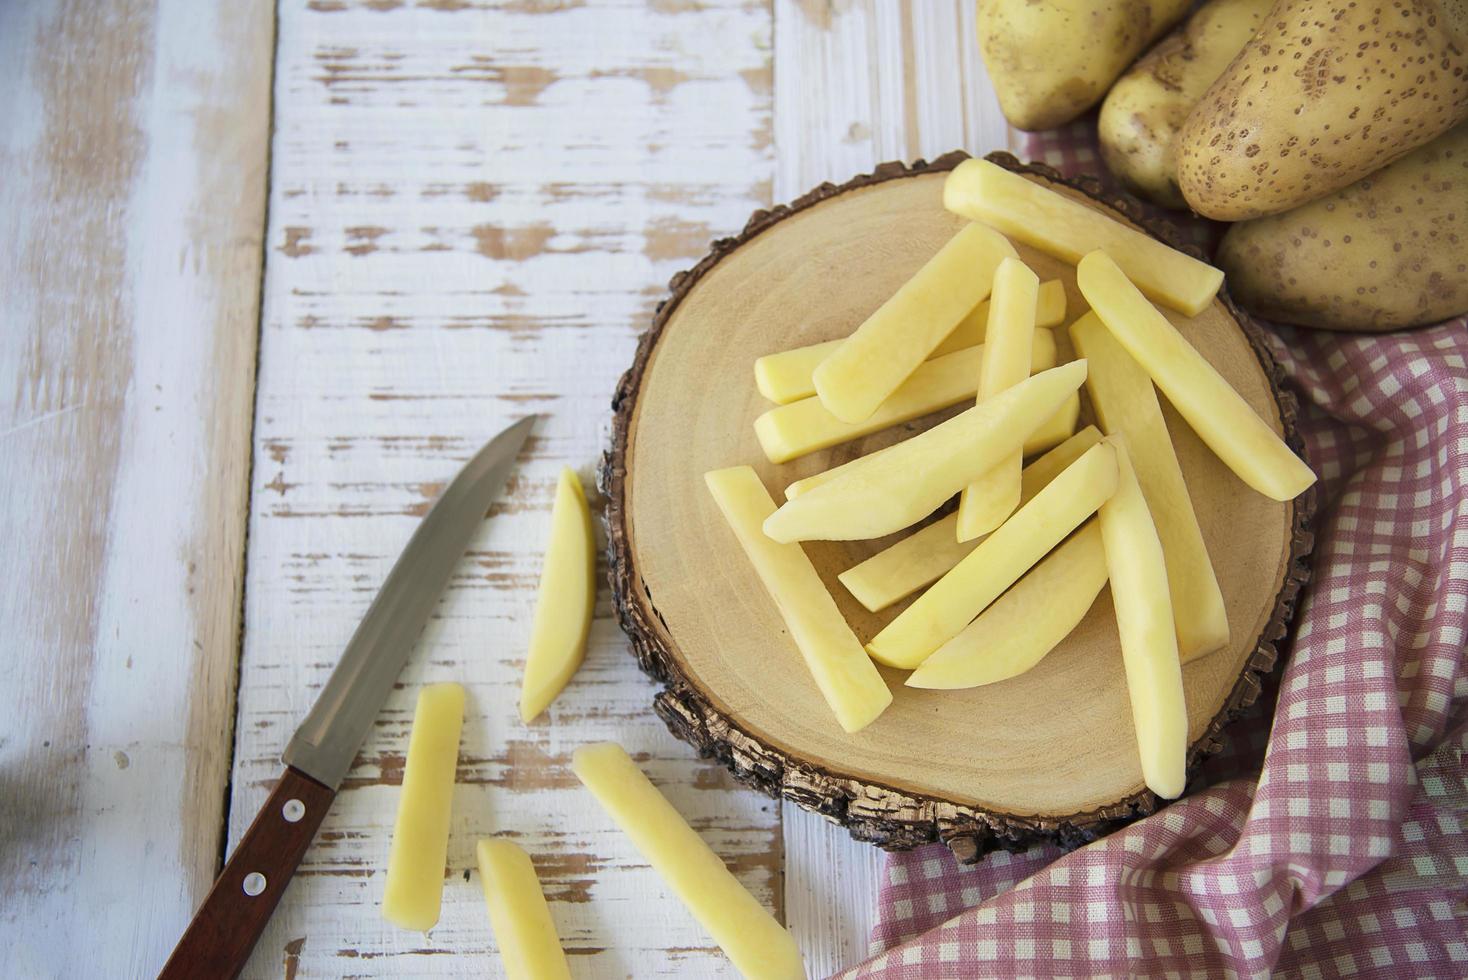 Sliced potato stick ready for making French fries - traditional food preparation concept photo